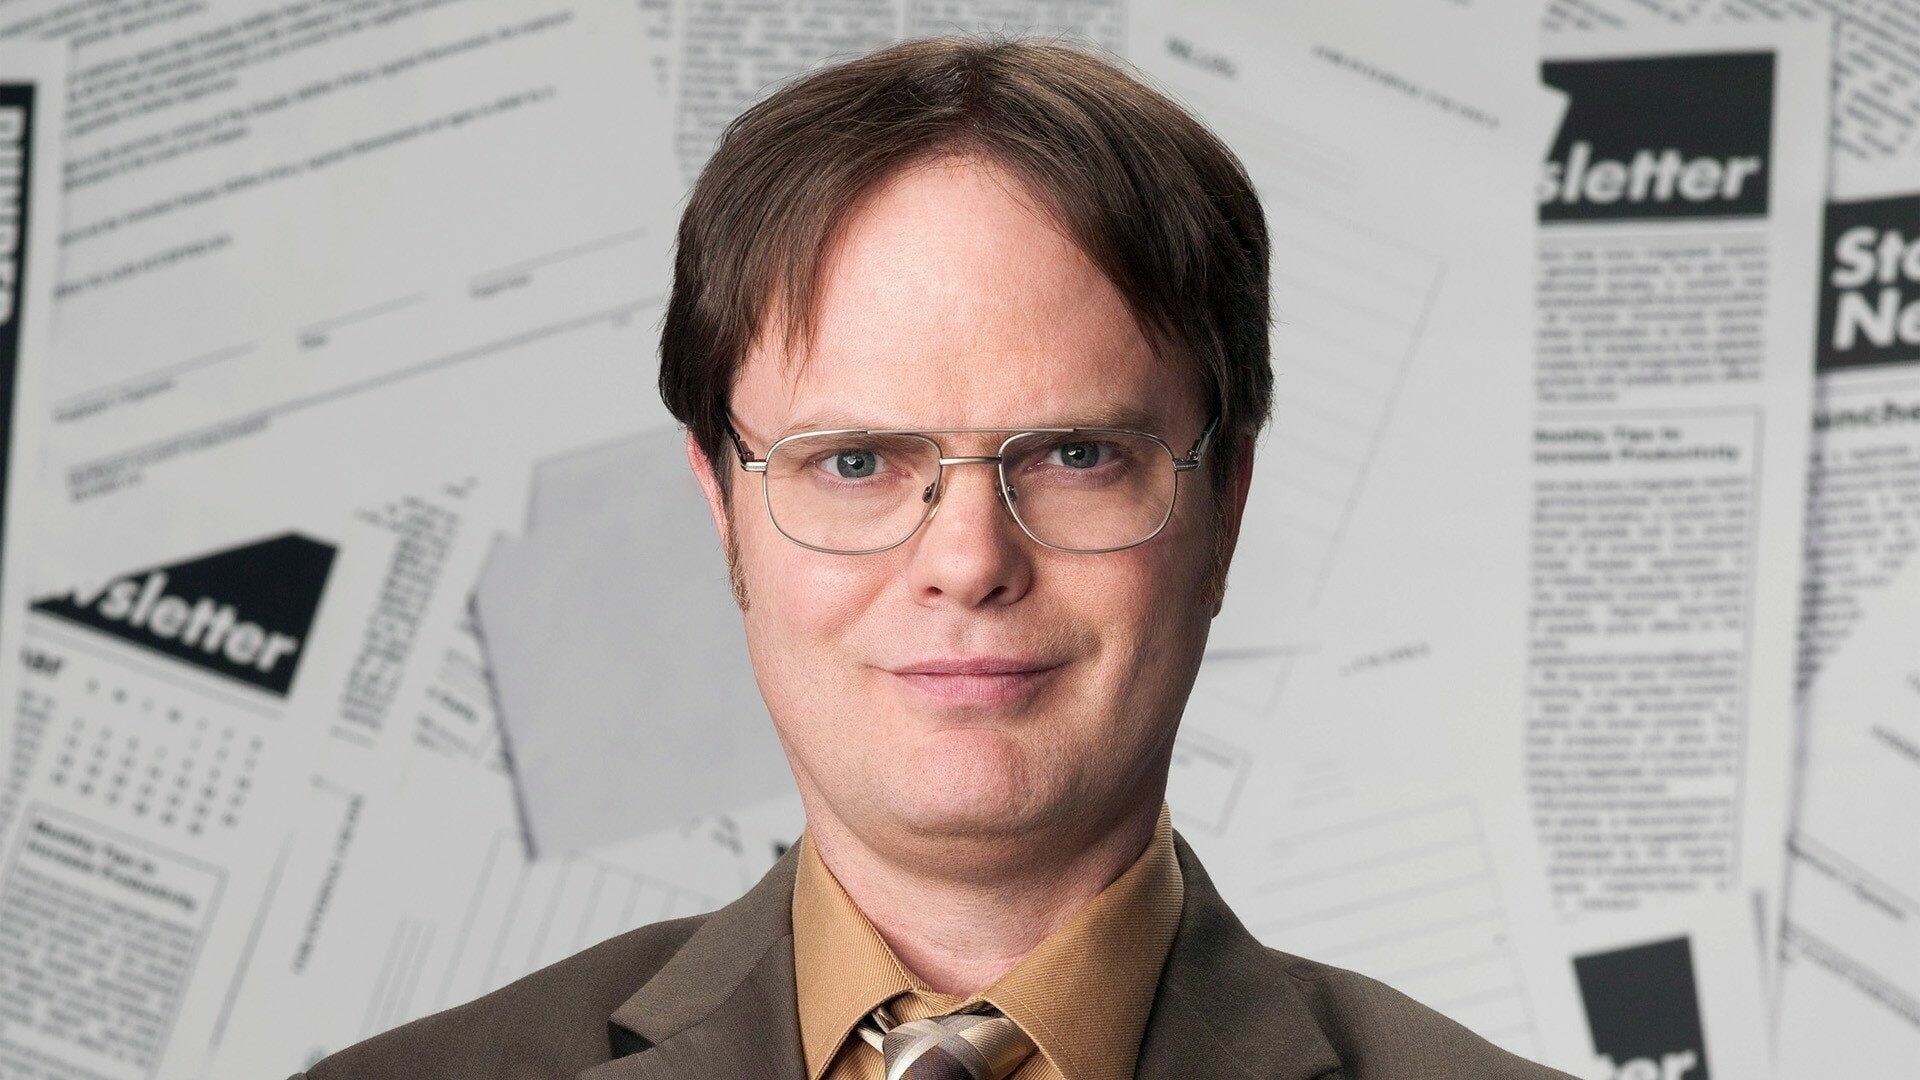 The Office (TV Series): Dwight Schrute, portrayed by Rainn Wilson, the assistant to the regional manager. 1920x1080 Full HD Background.